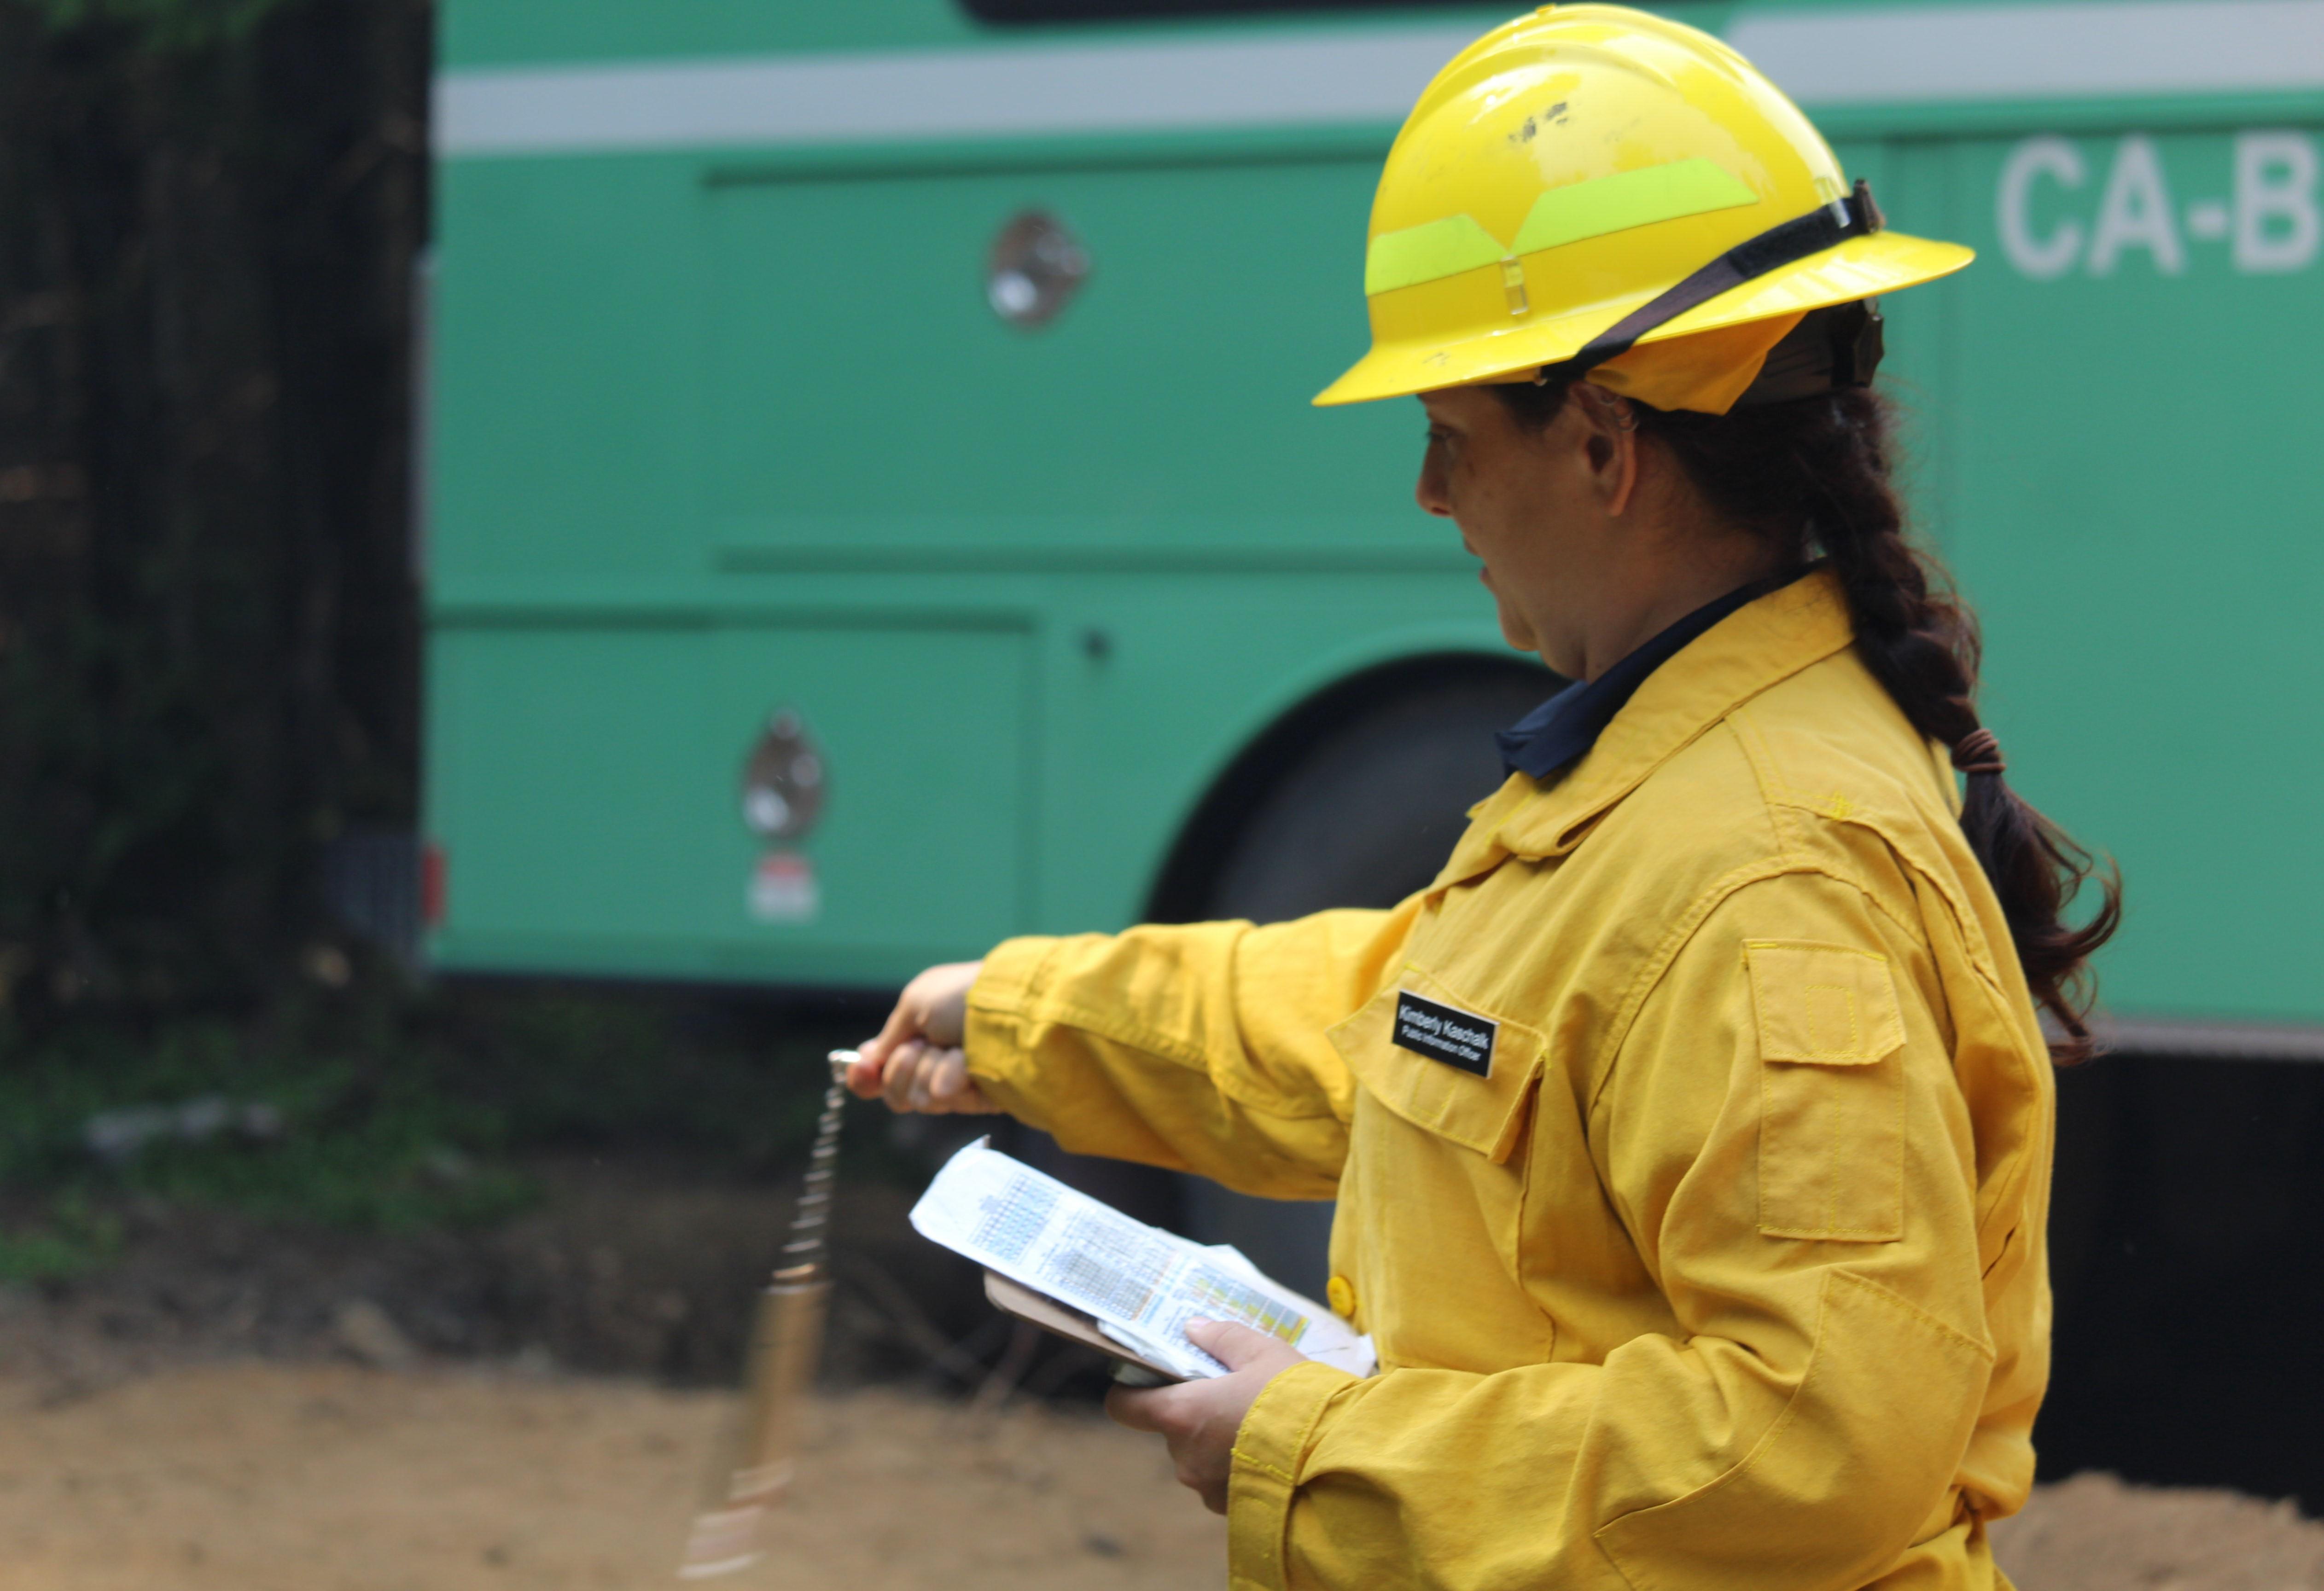 A female firefighter uses specialized equipment to measure weather while standing near a green truck in a forest